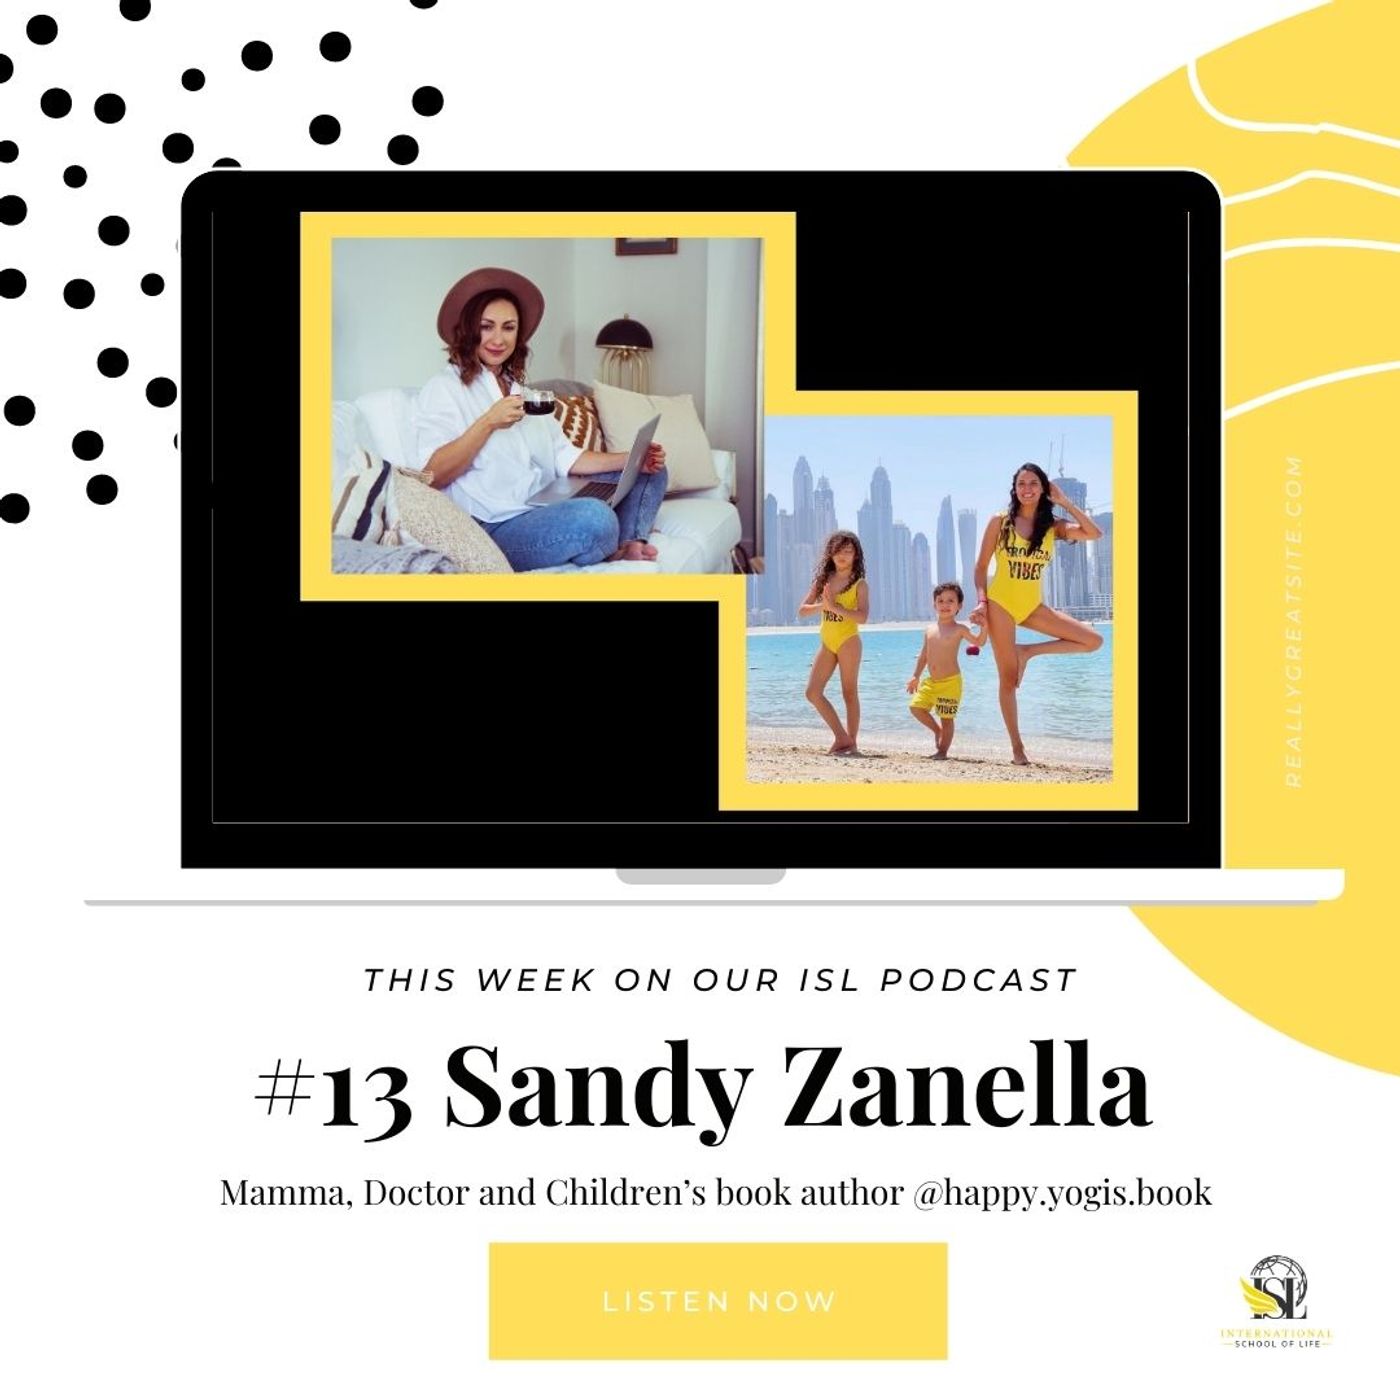 #13 Interview with Sandy Zanella –- Mamma, Doctor and Children’s book author @happy.yogis.book (recorded April 2021)